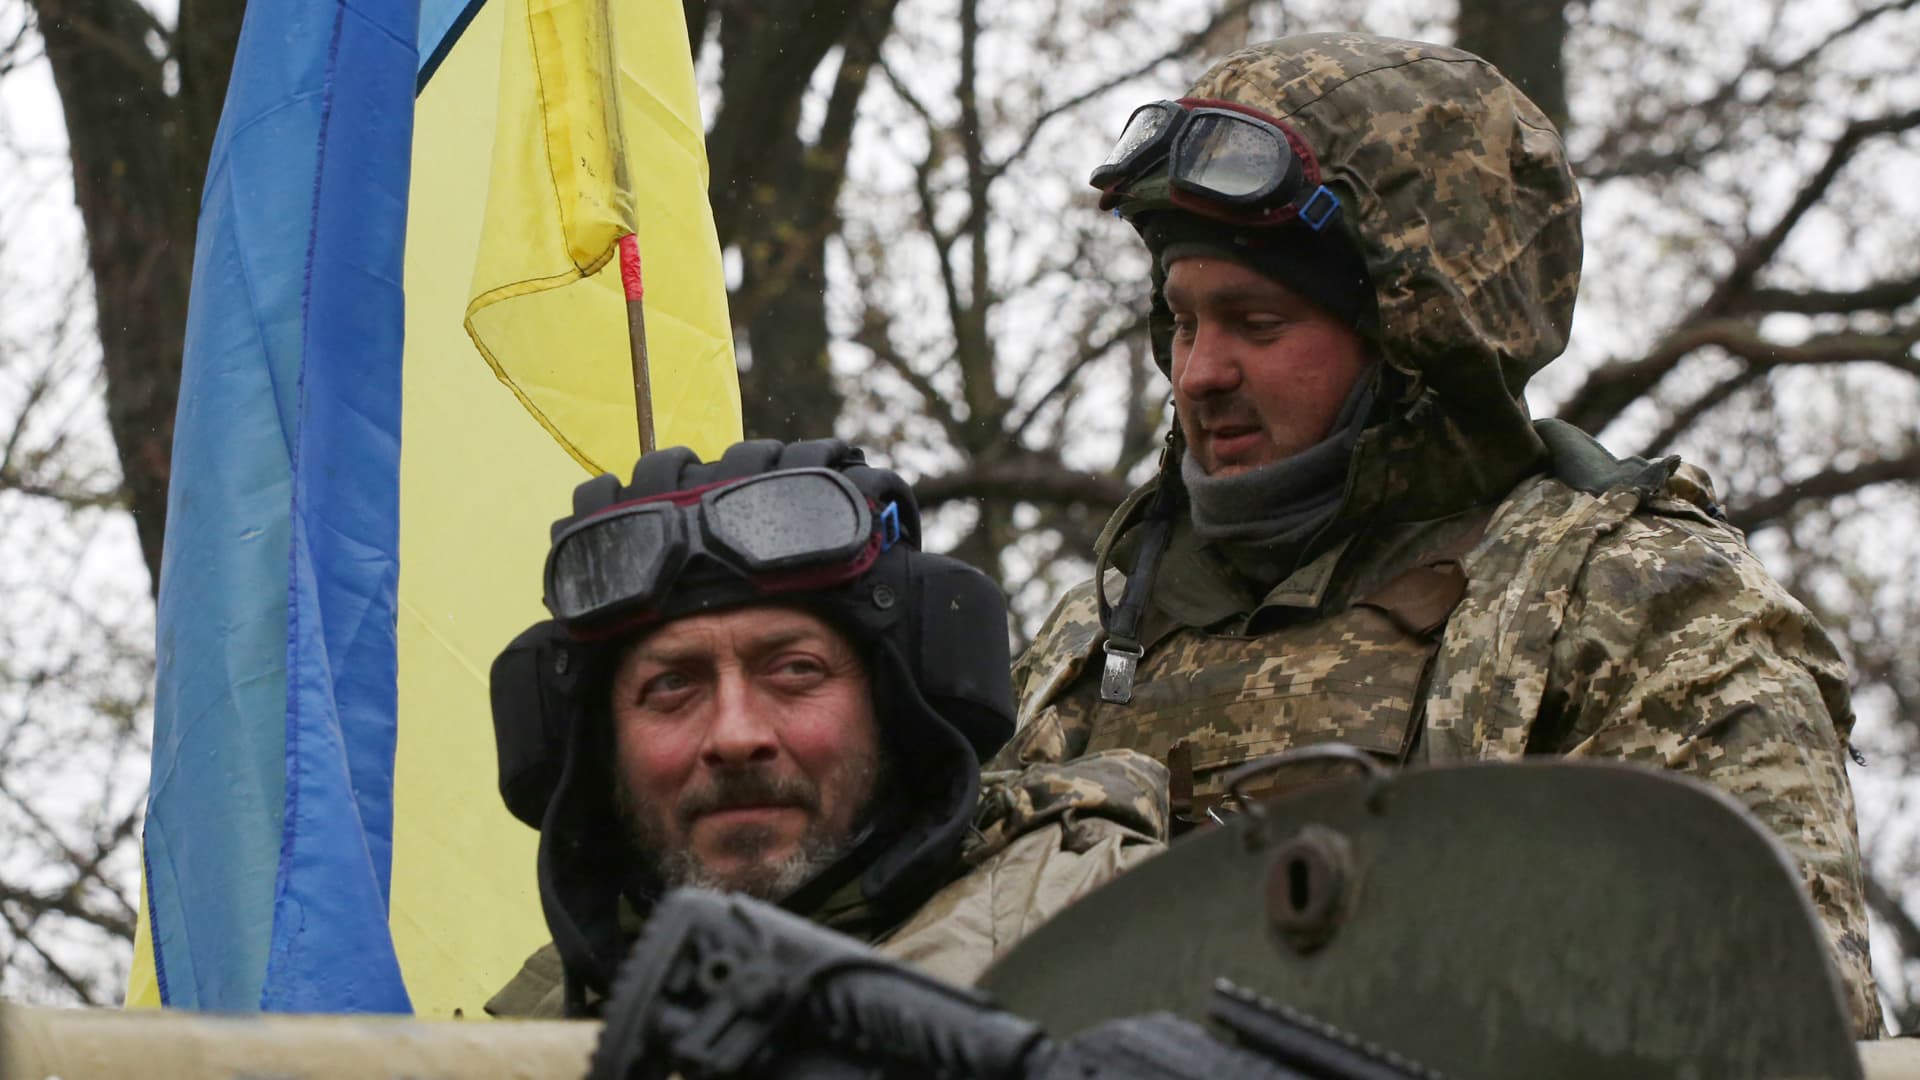 What occurs subsequent within the Russia-Ukraine struggle in Donbas, east Ukraine?